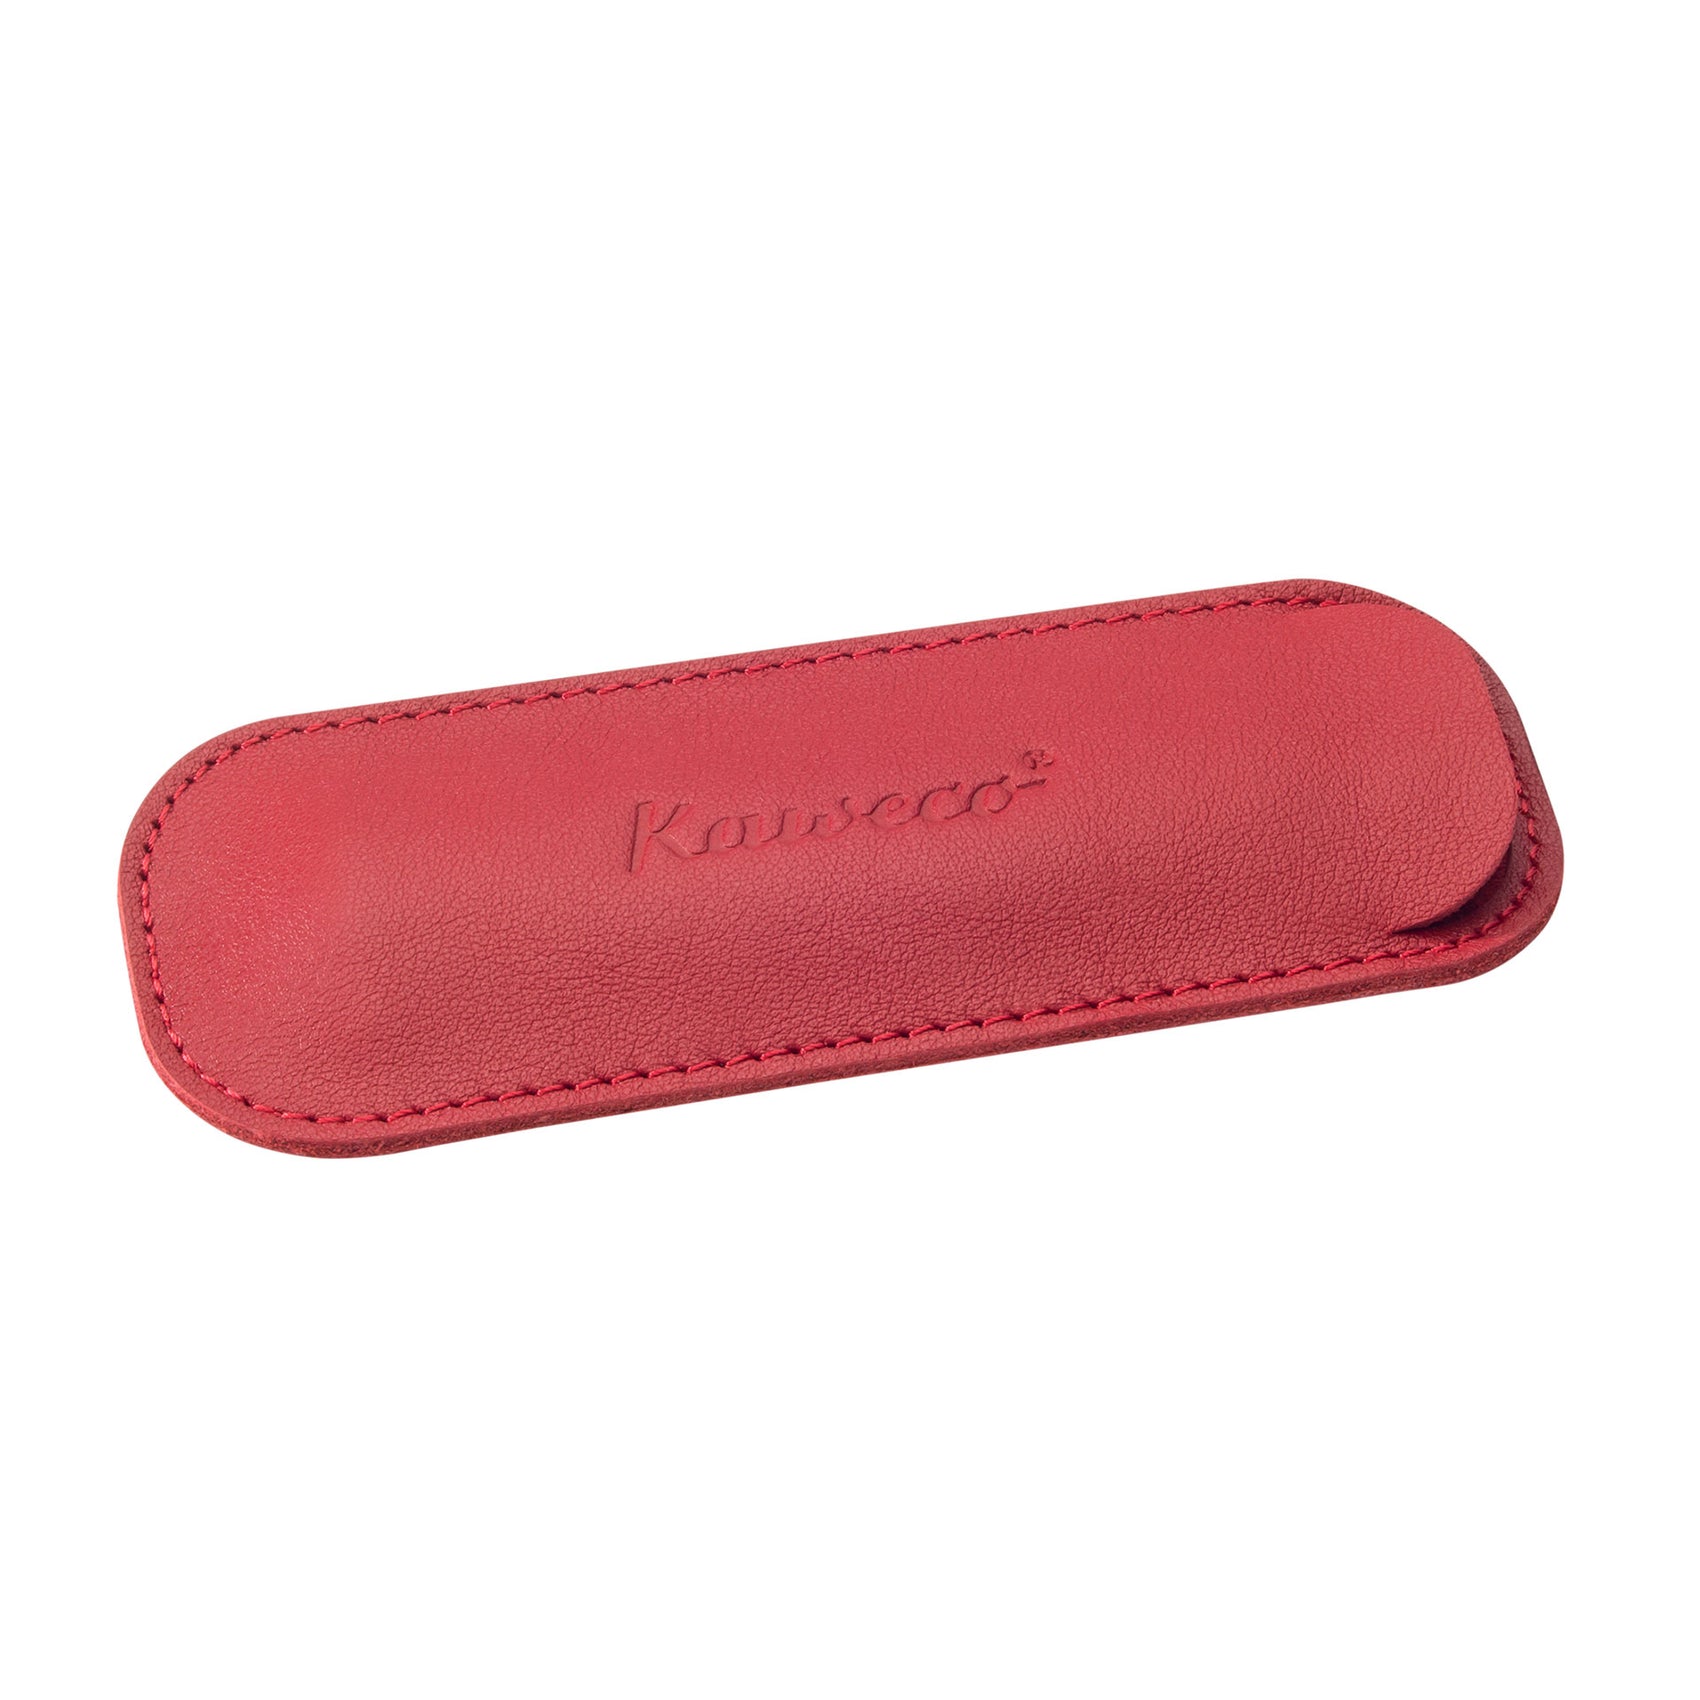 Kaweco Kaweco Eco Leather Pouch Chili Pepper | For 2 Classic Sport Pens 